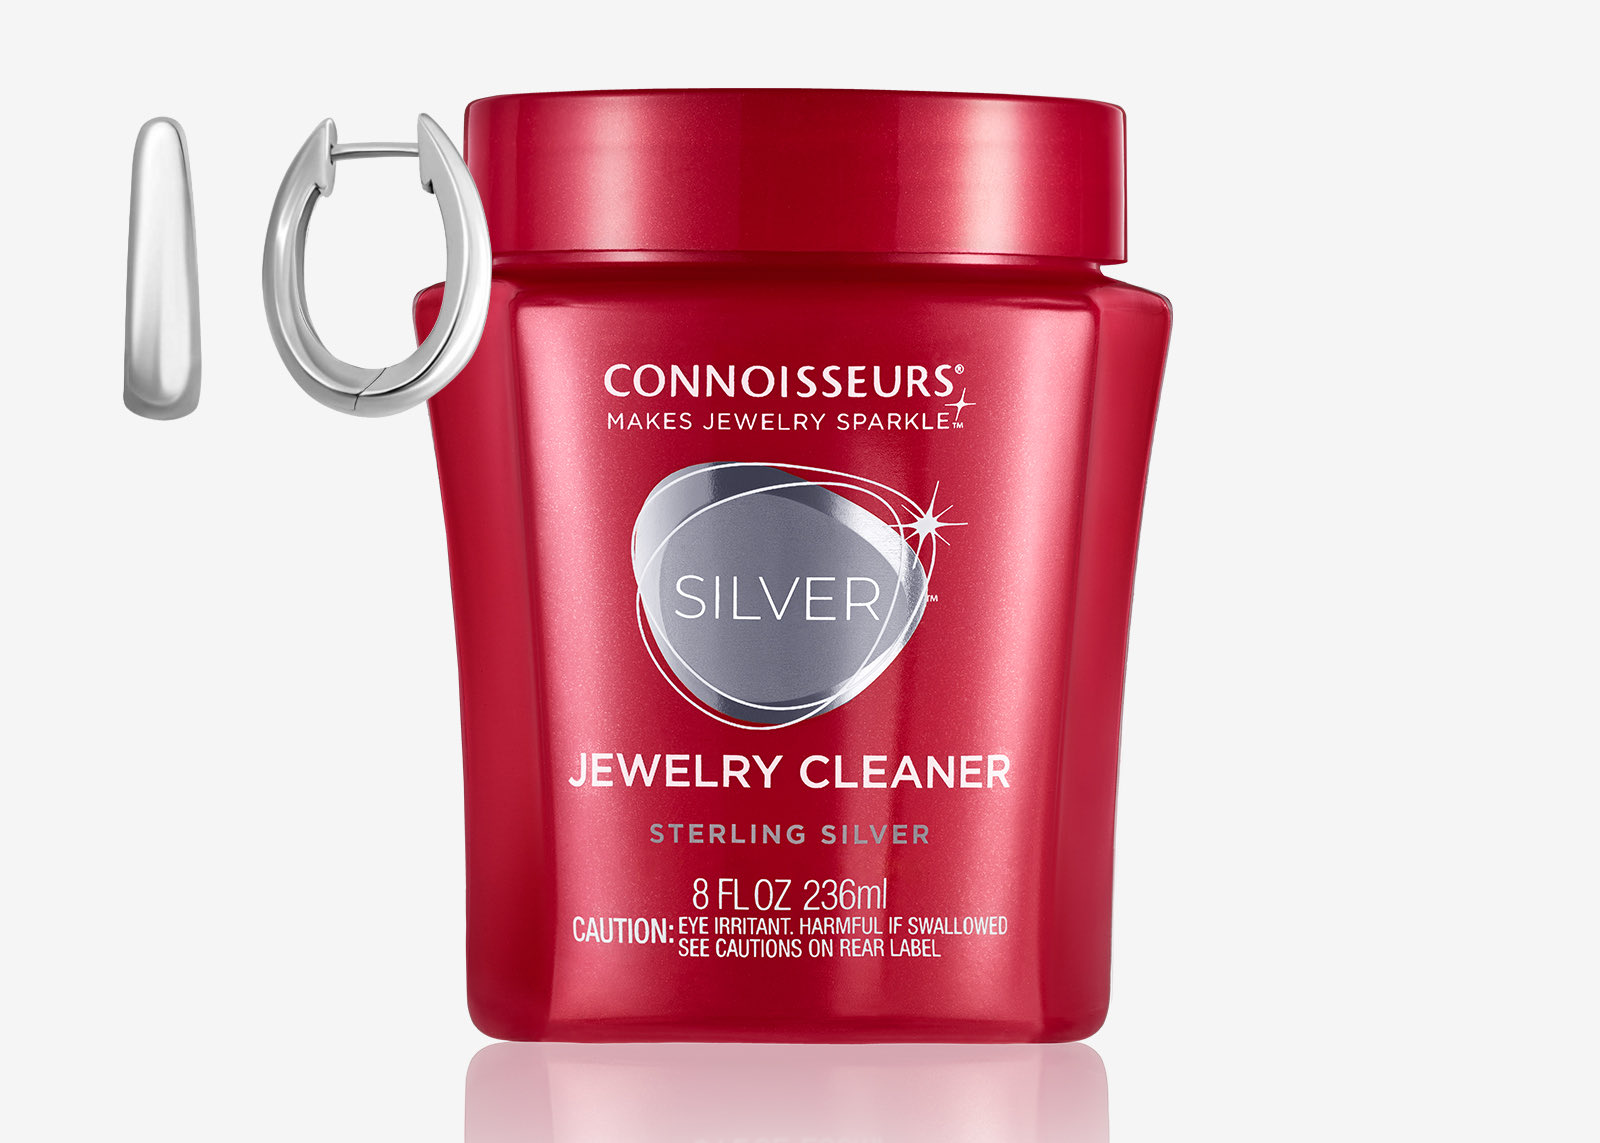 Silver Jewelry Cleaner - Connoisseurs Jewelry Cleaner